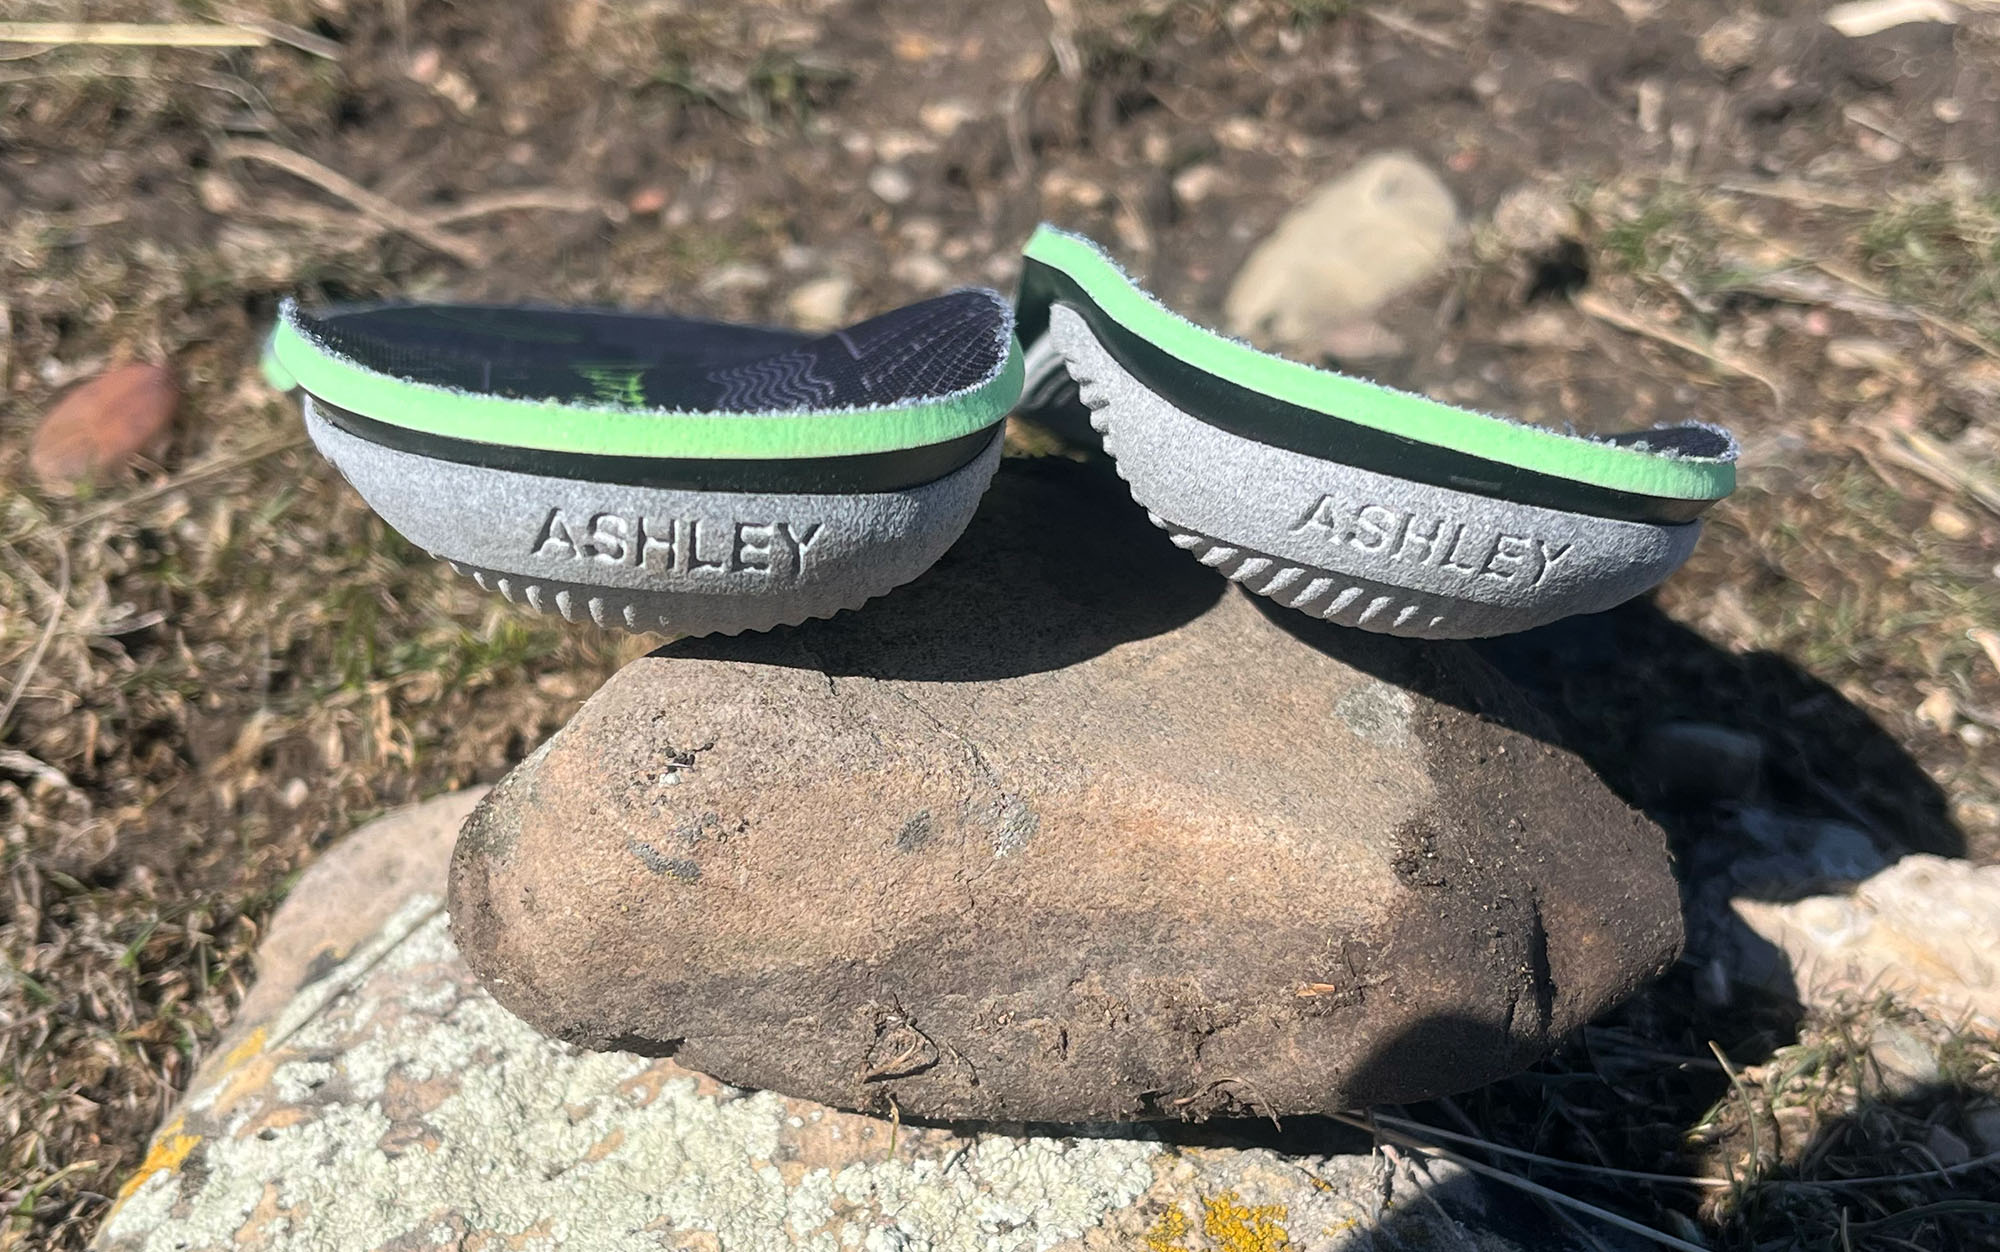 My personalized insoles featured my name engraved on the back, but that’s not the only customization.